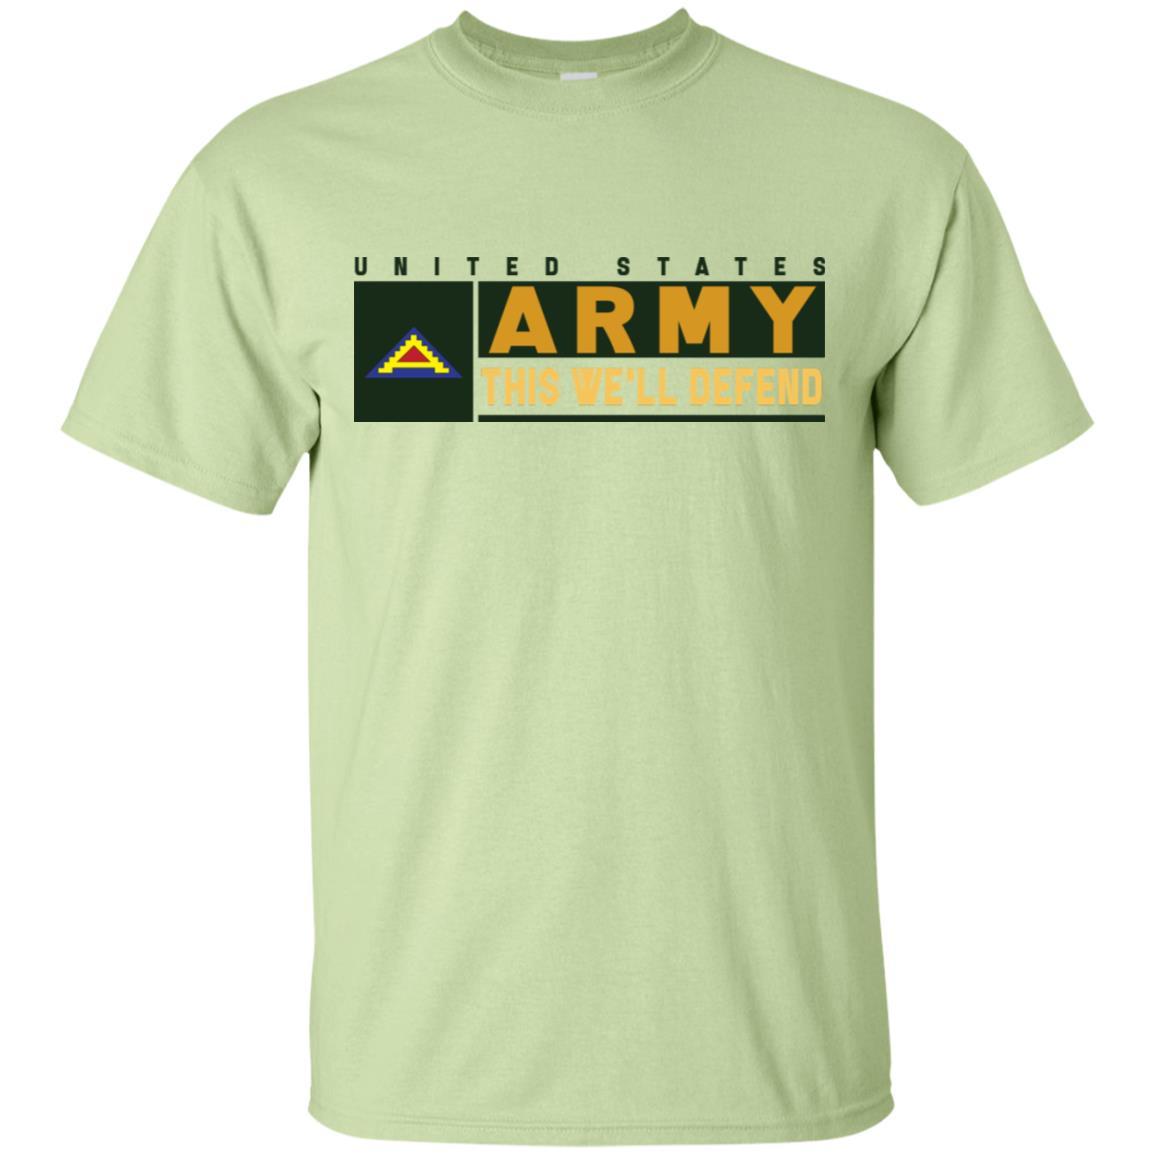 US Army 7TH ARMY- This We'll Defend T-Shirt On Front For Men-TShirt-Army-Veterans Nation